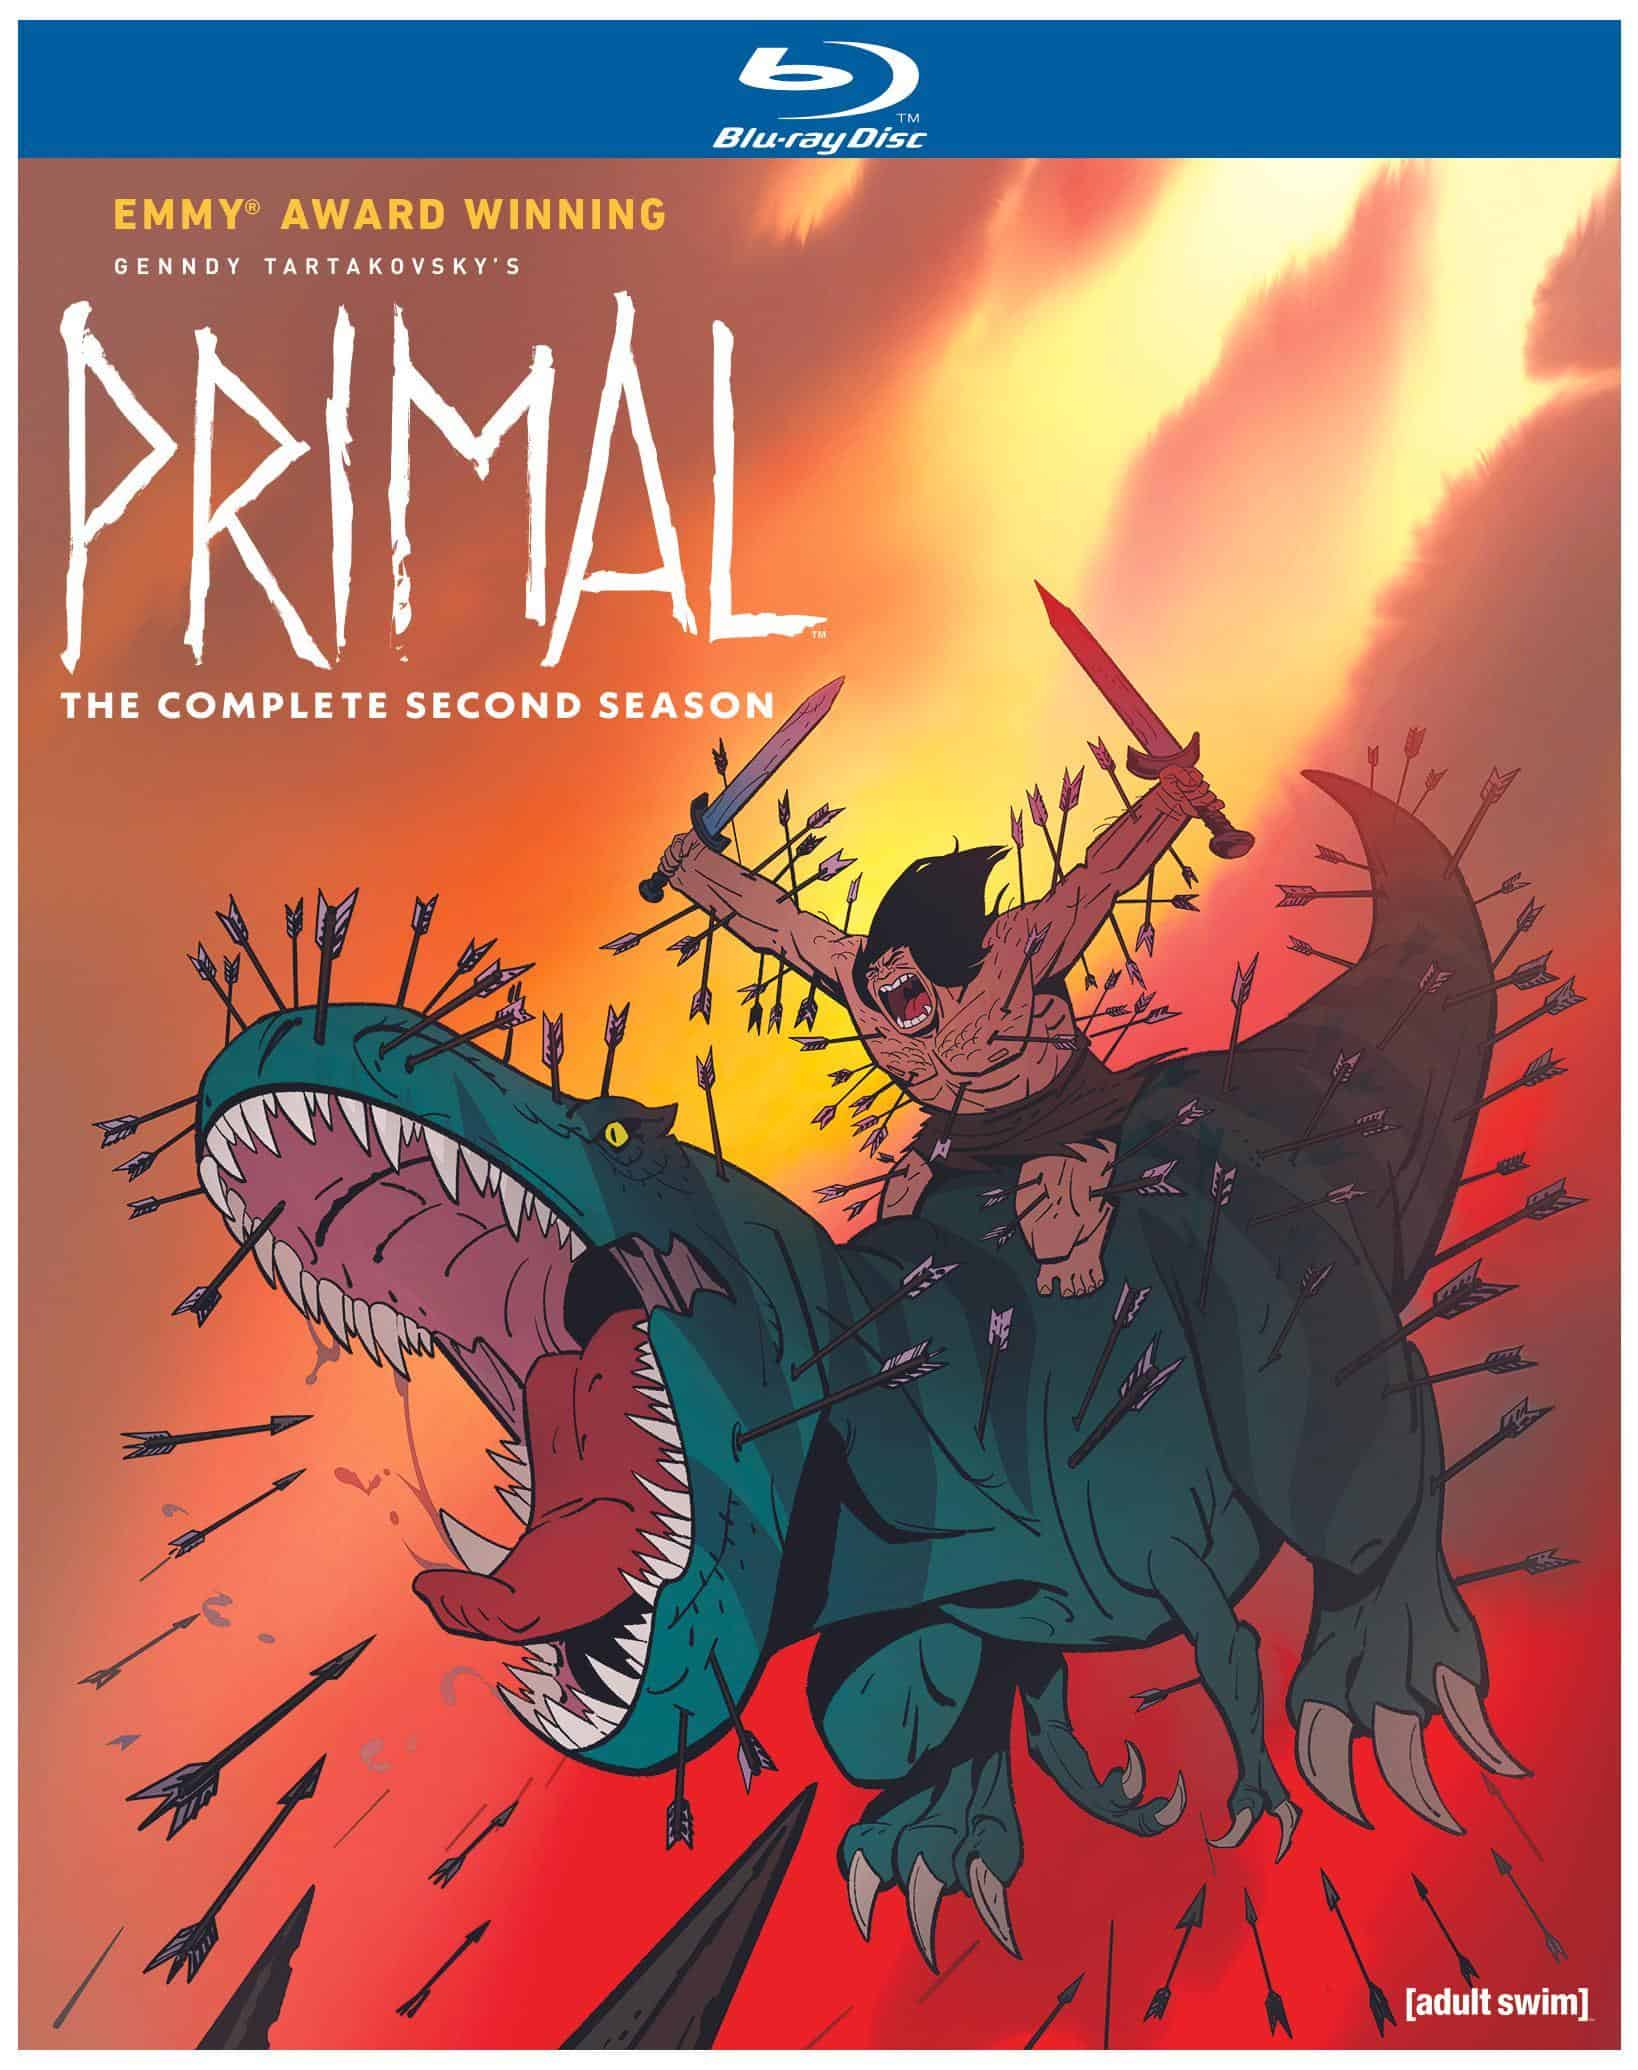 Primal: The Complete Second Season comes to Blu-ray April 25th 25